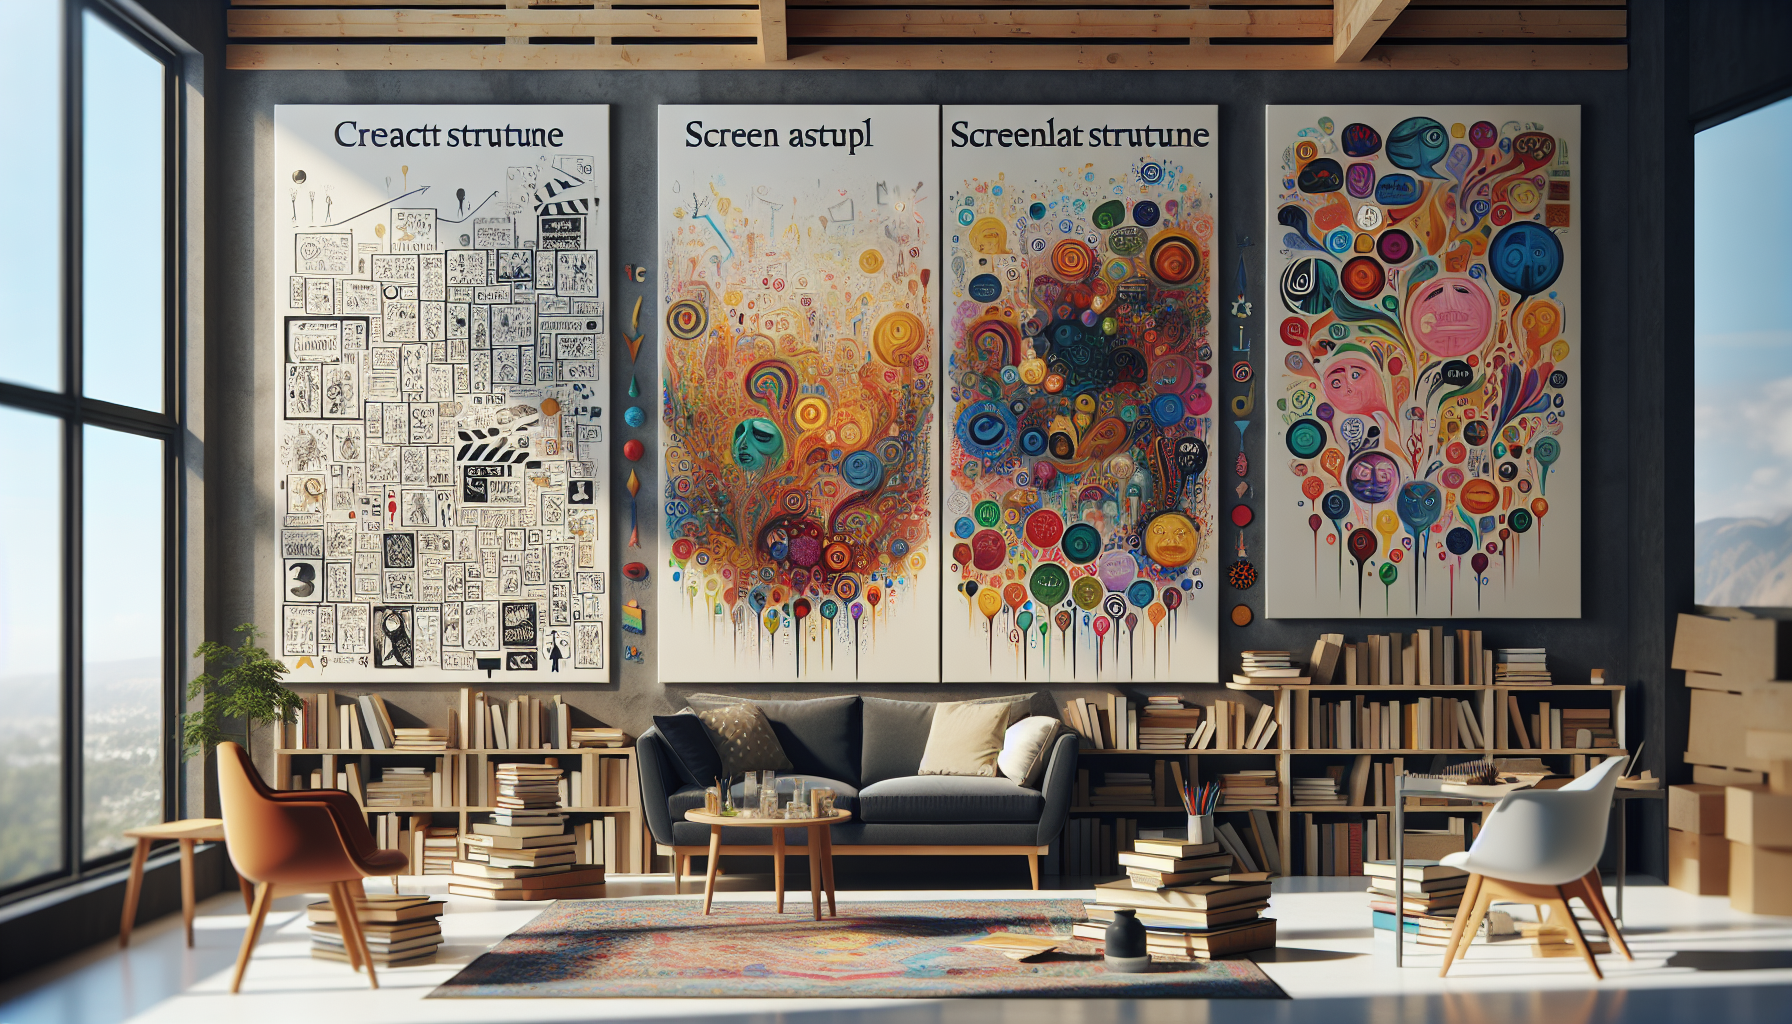 An imaginative artist's studio filled with multiple canvases depicting various stages of screenplay development: one canvas shows a detailed outline of a three-act structure, another features vibrant